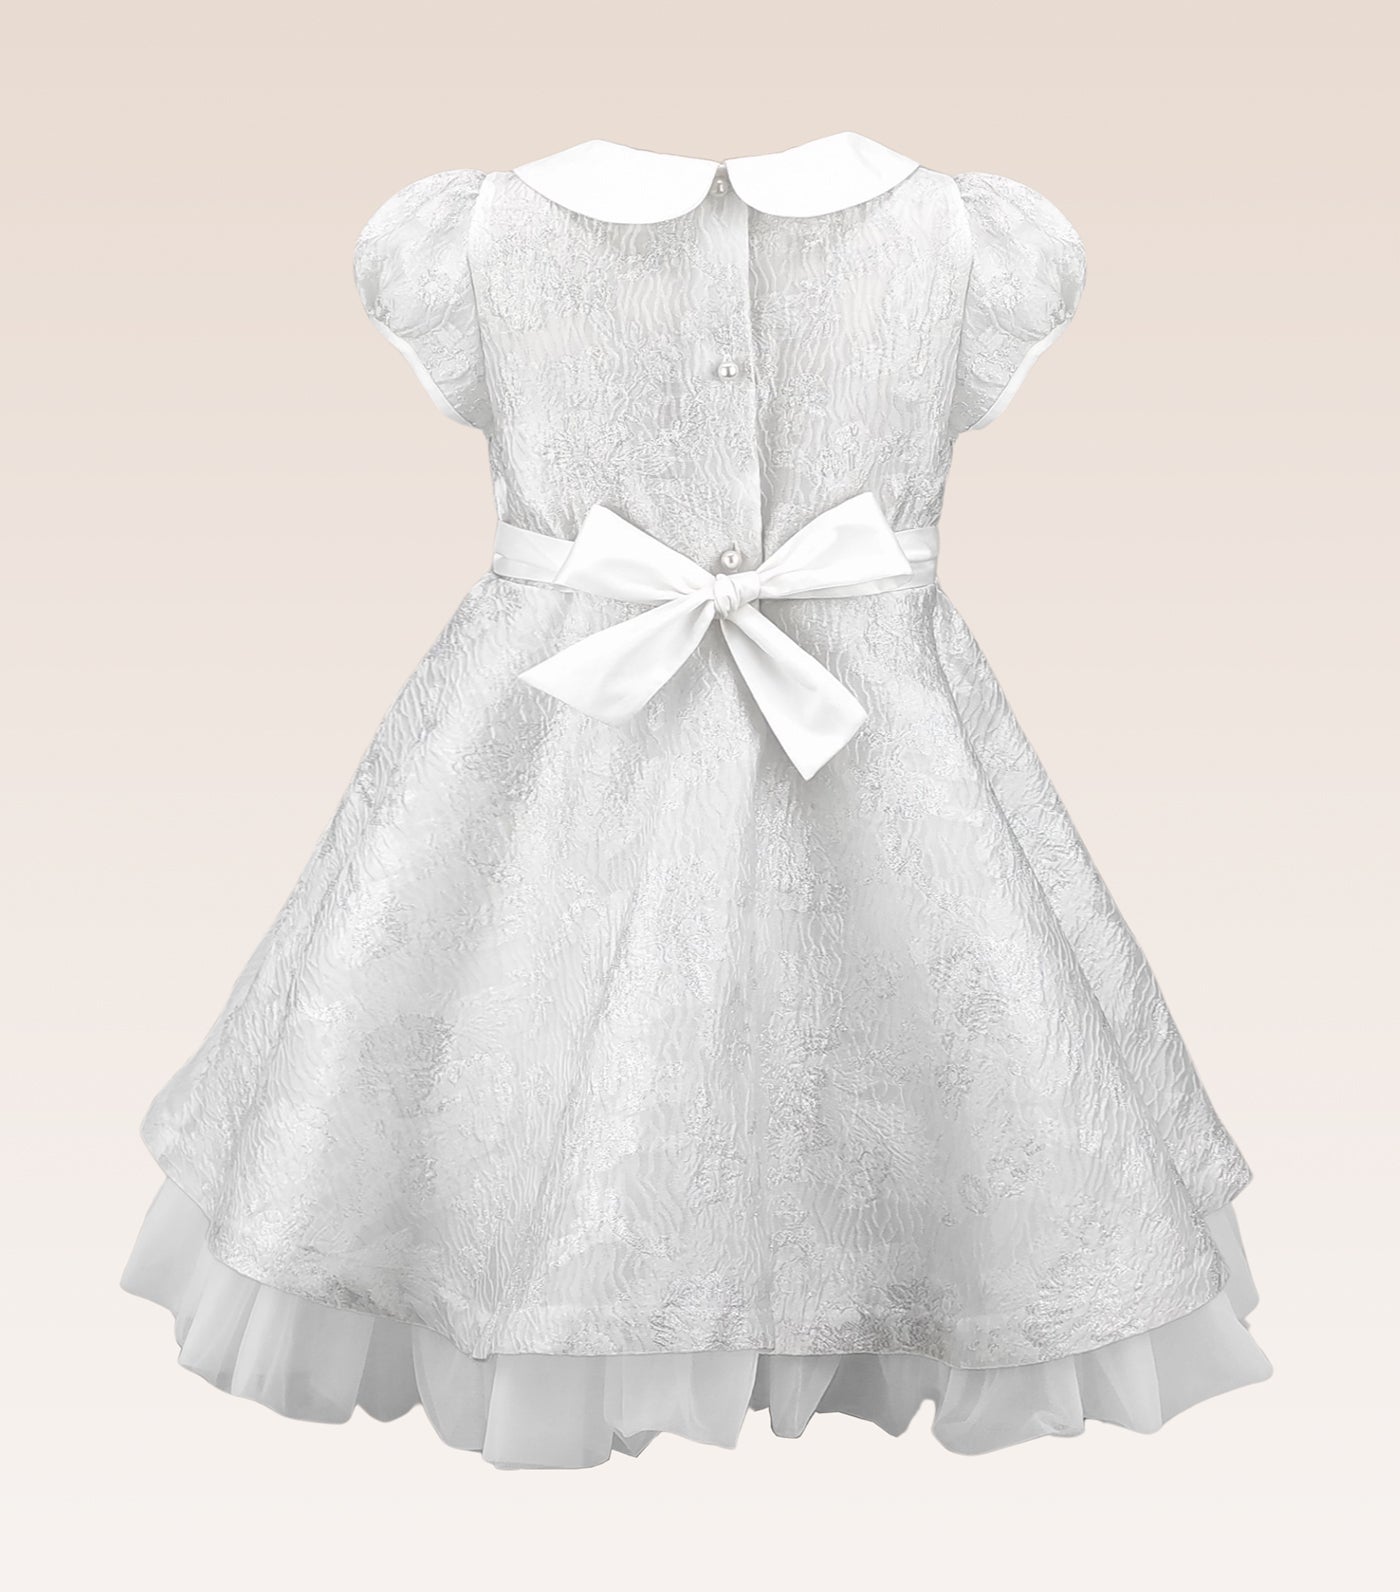 Georgette Baby Girls Silver Jacquard Party Dress with Tulle Underlay Skirt